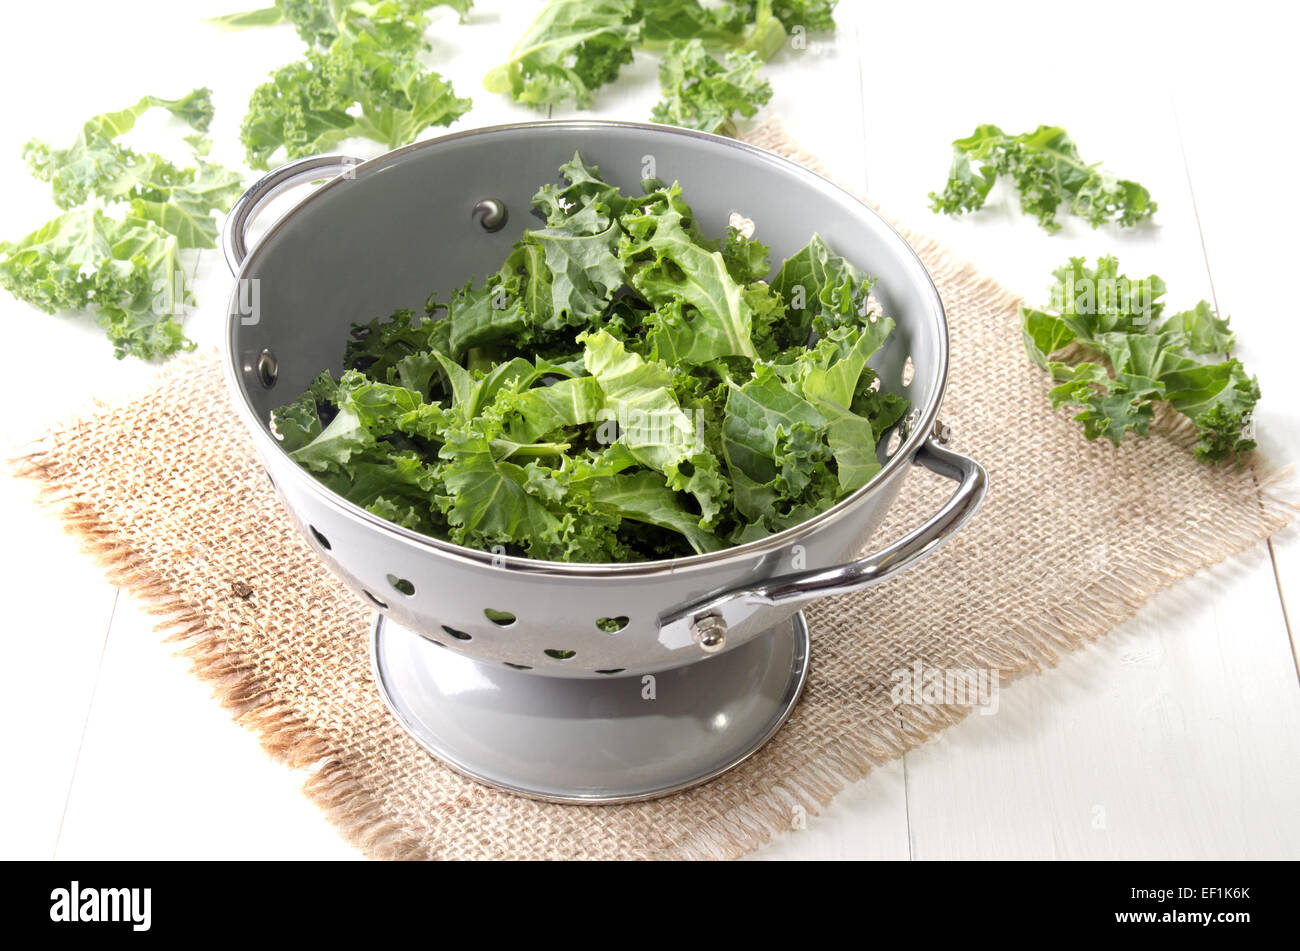 colander on jute with fresh curly kale Stock Photo